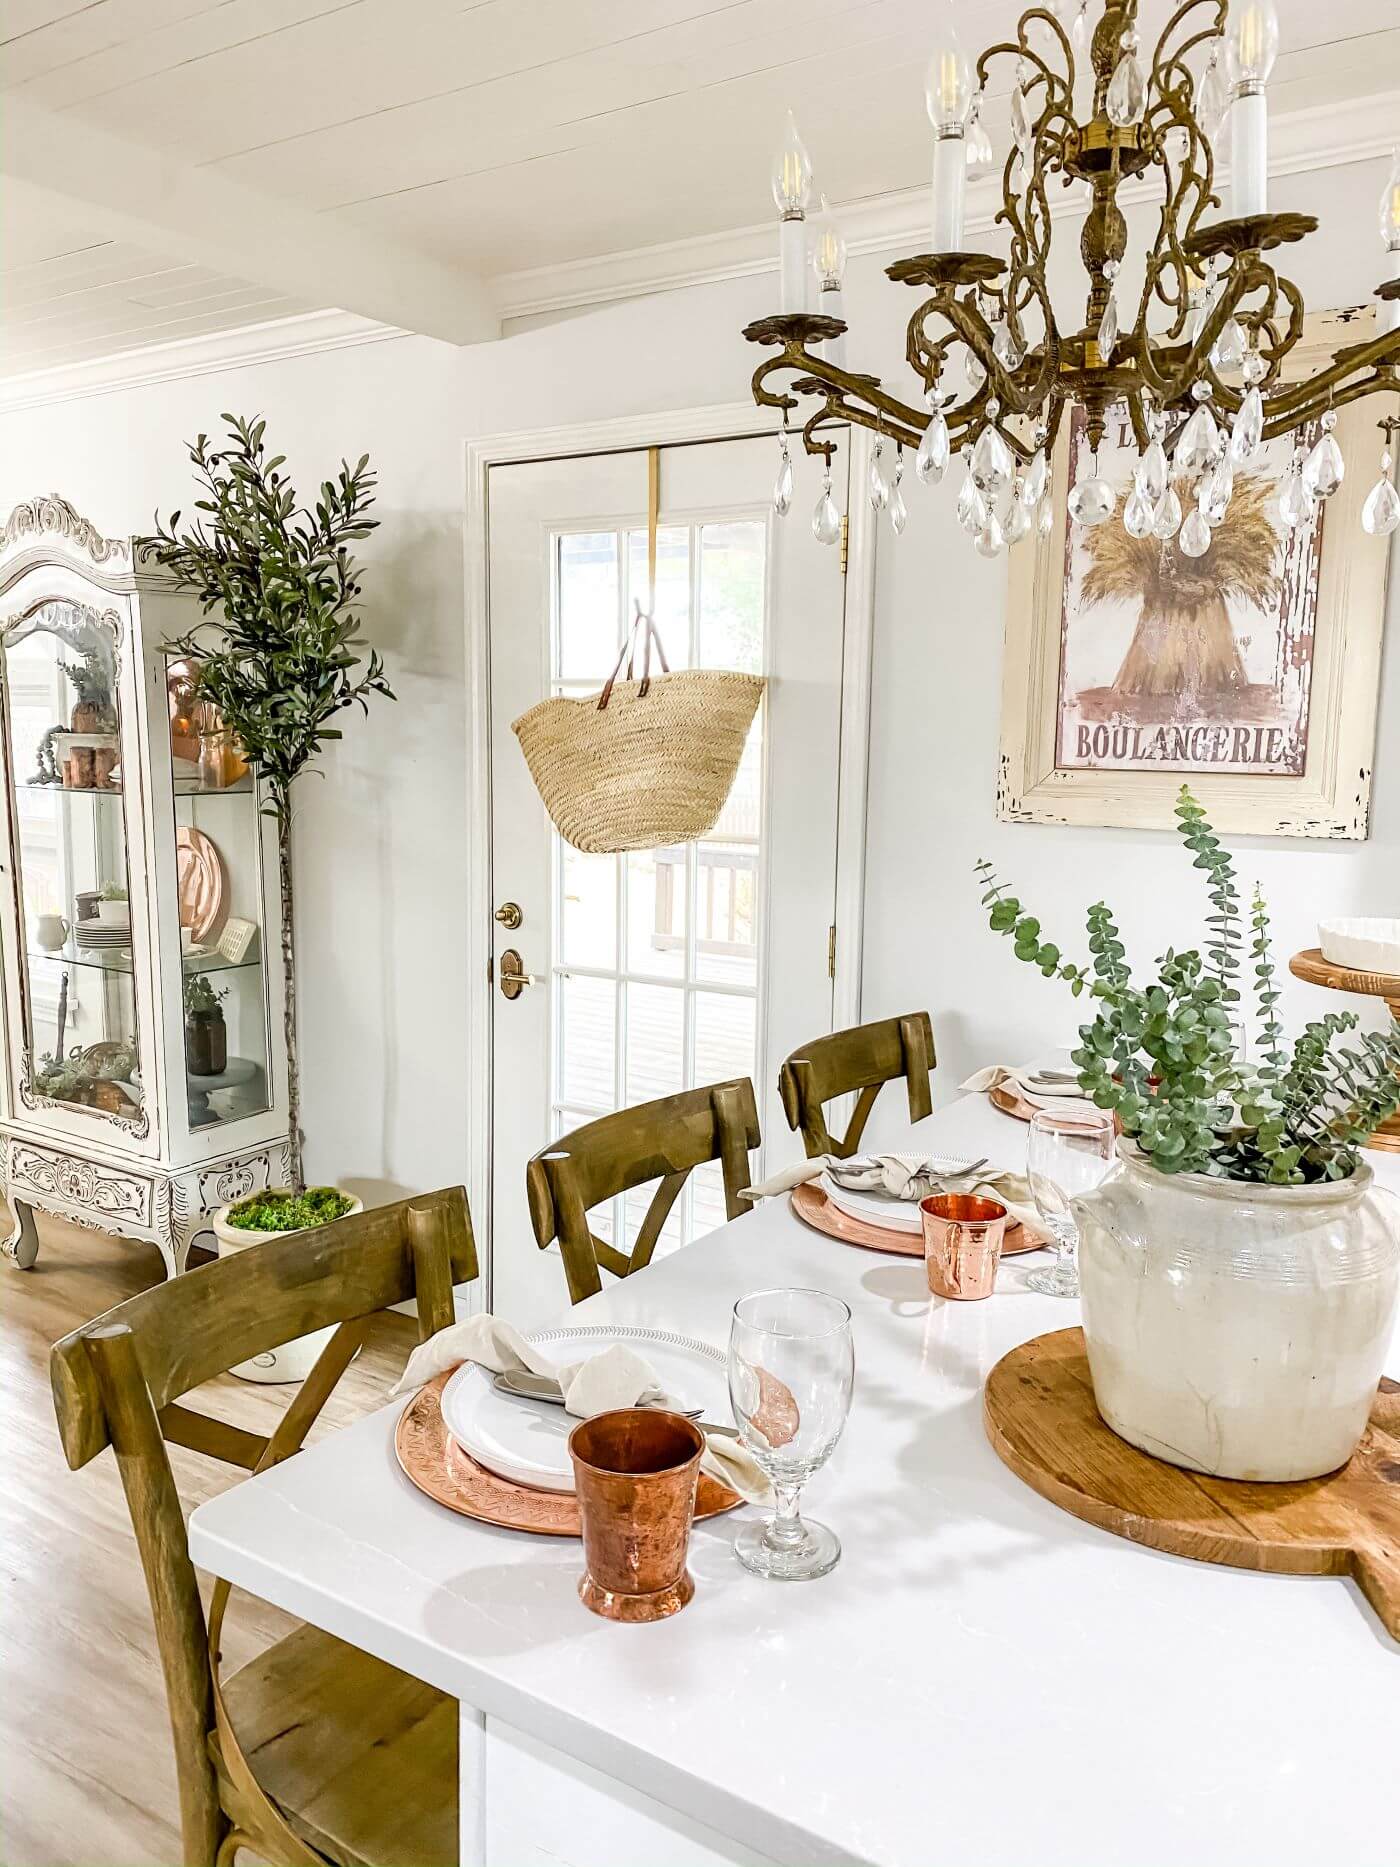 A white farmhouse table with an antique crystal chandelier above. The table settings are made from copper colored material and a white ceramic piece houses fresh pops of green from the garden in the table’s centerpiece